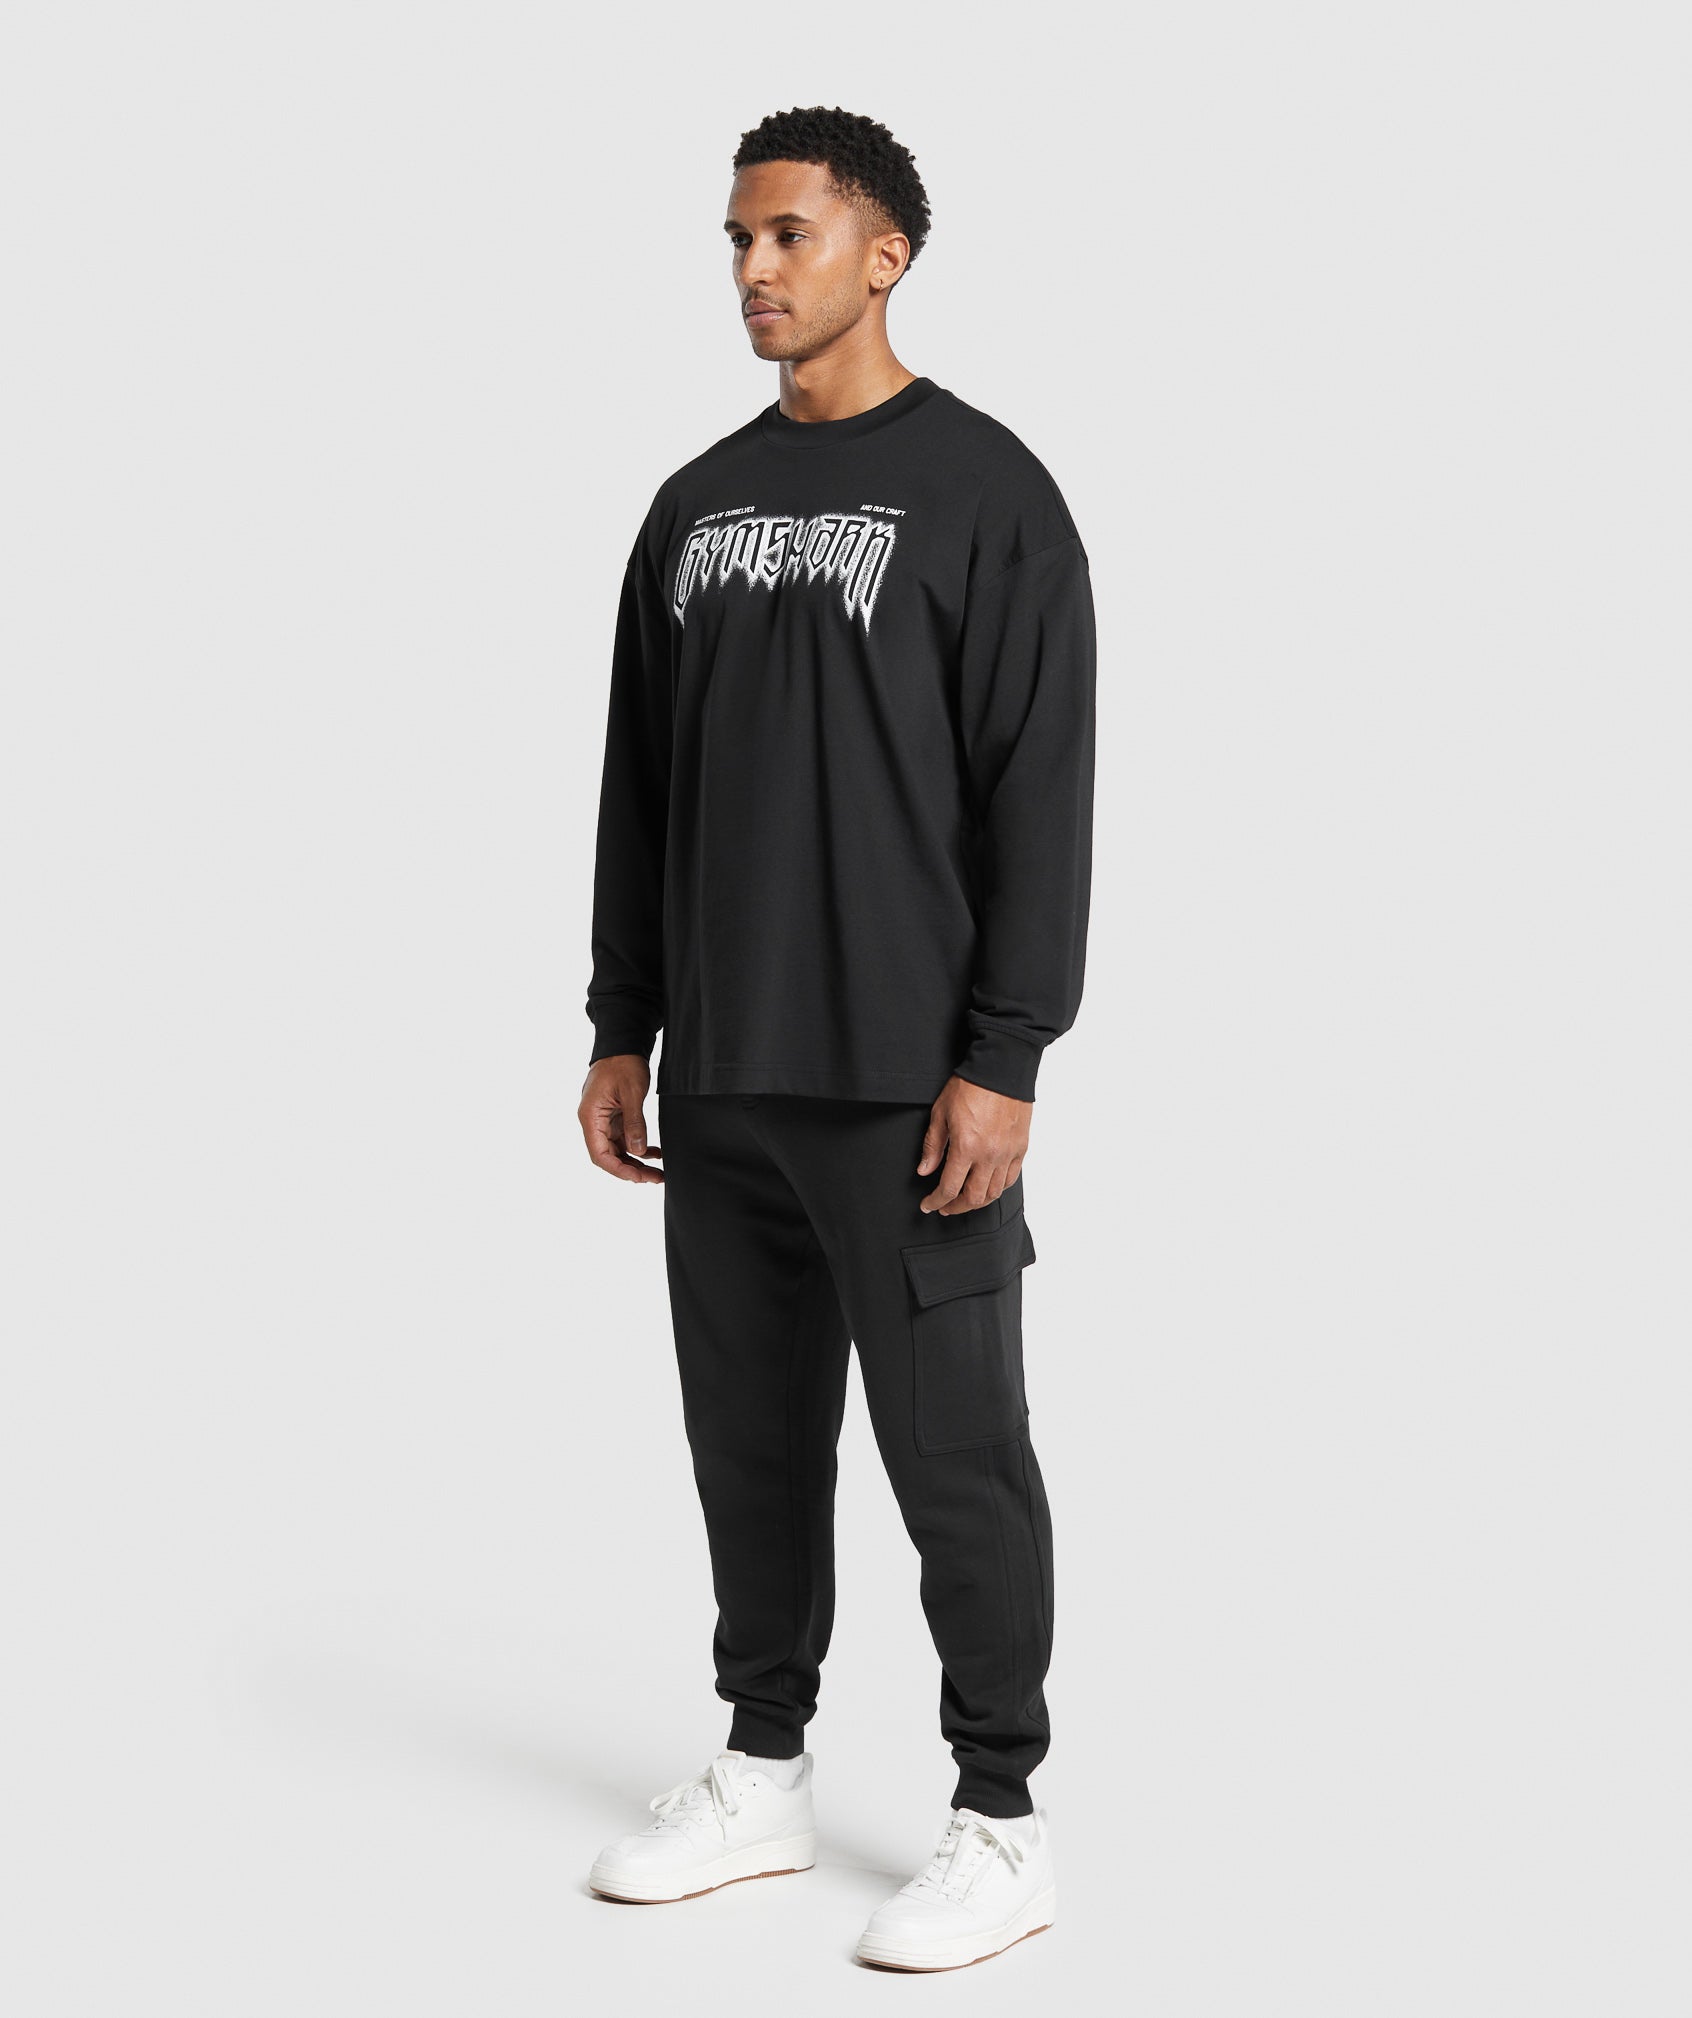 Masters of Our Craft Long Sleeve T-Shirt in Black - view 4